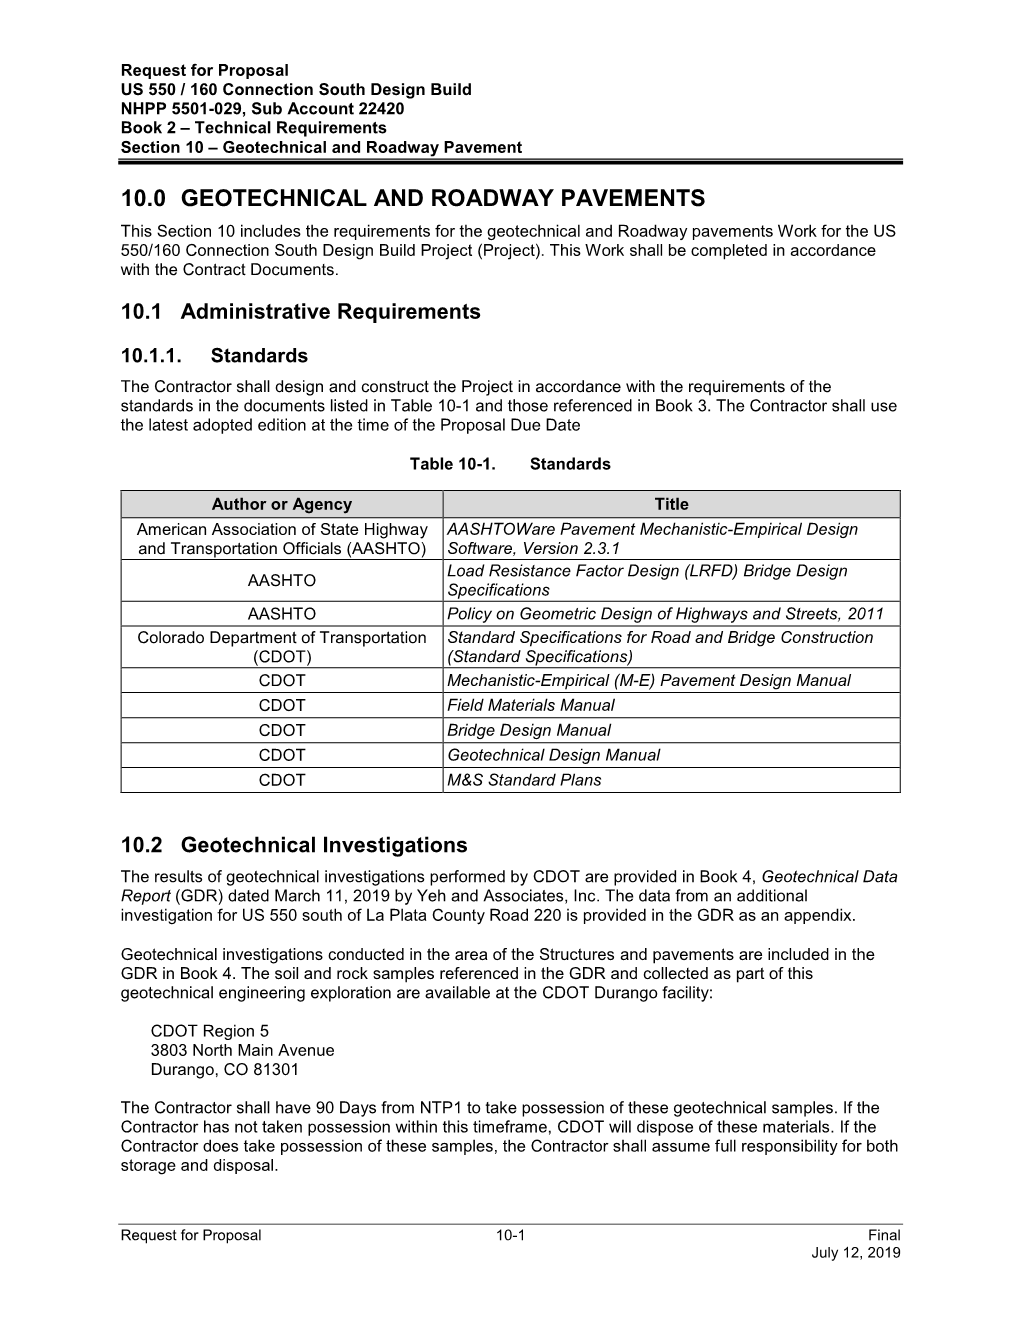 Book 2 – Technical Requirements Section 10 – Geotechnical and Roadway Pavement